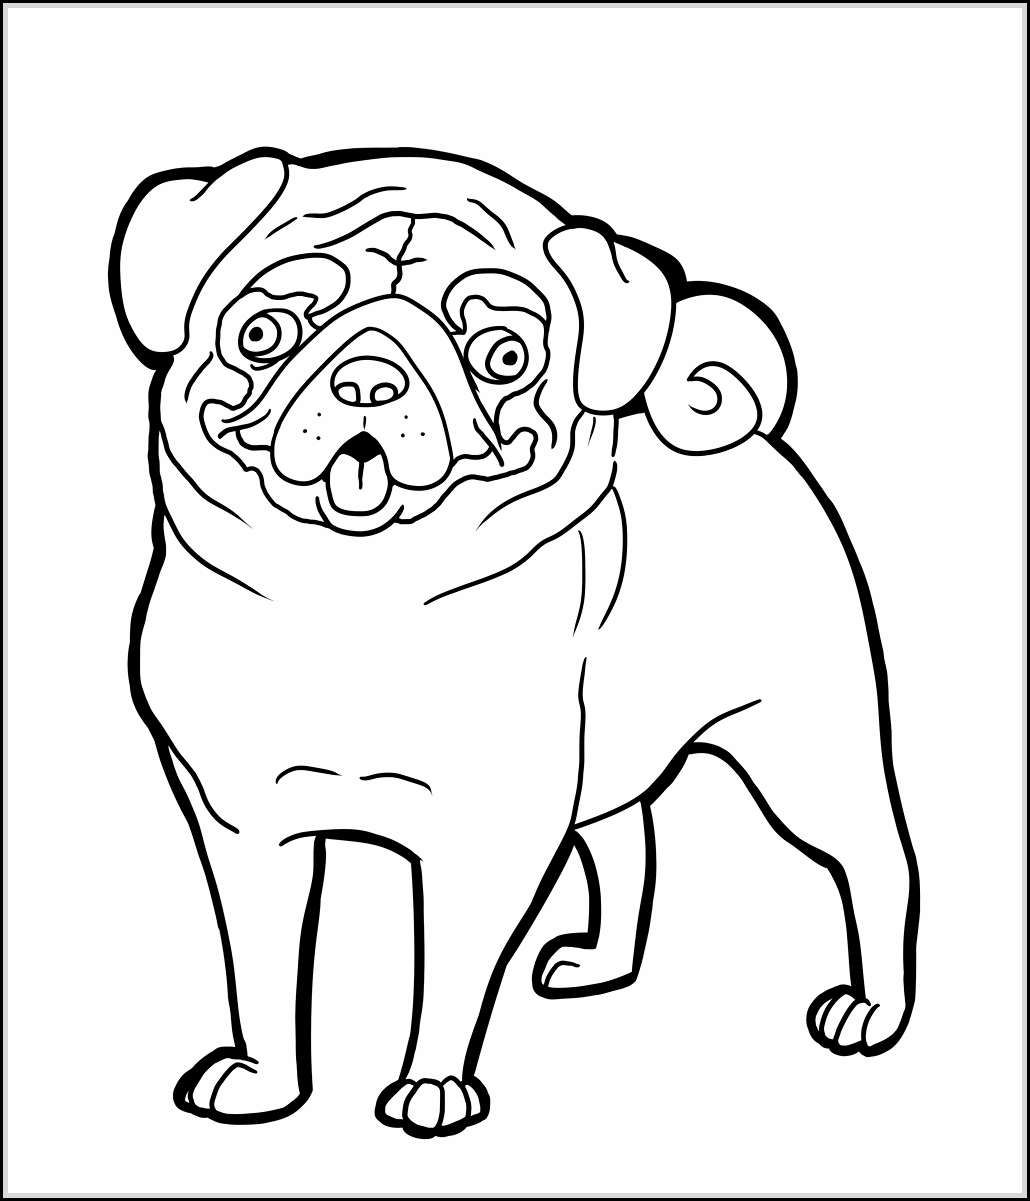 Pug Coloring Pages - Coloring Labs